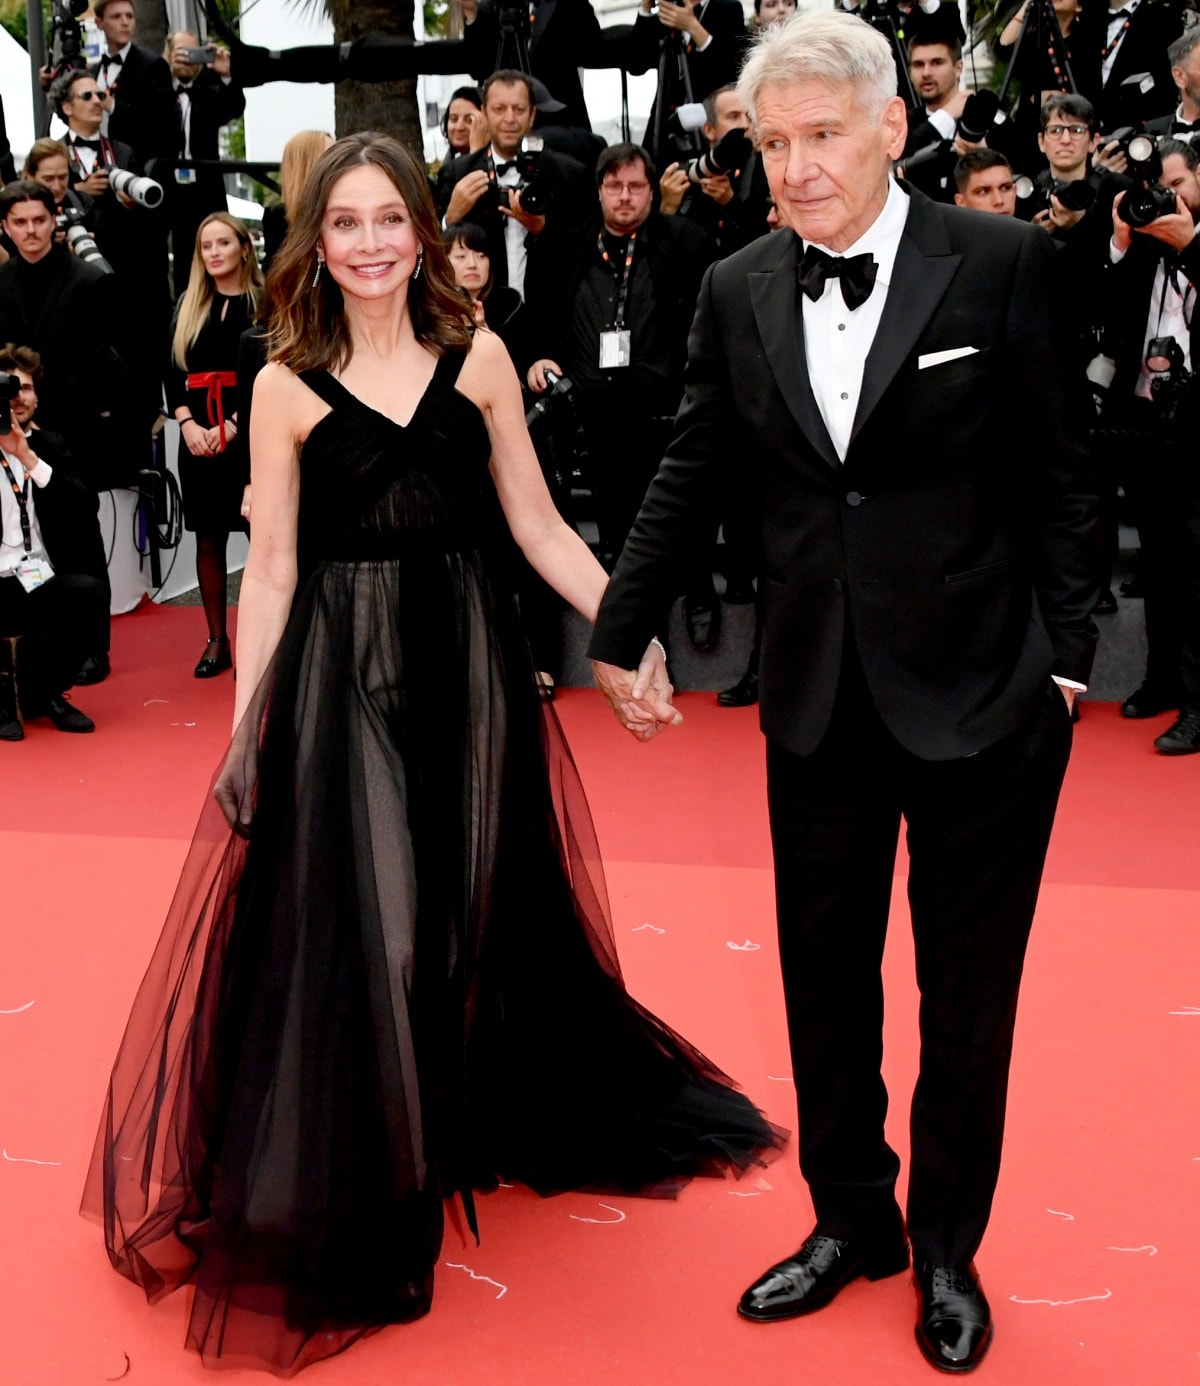 Calista Flockhart and Harrison Ford attending the premiere of Indiana Jones and the Dial of Destiny during the 76th Cannes Film Festival